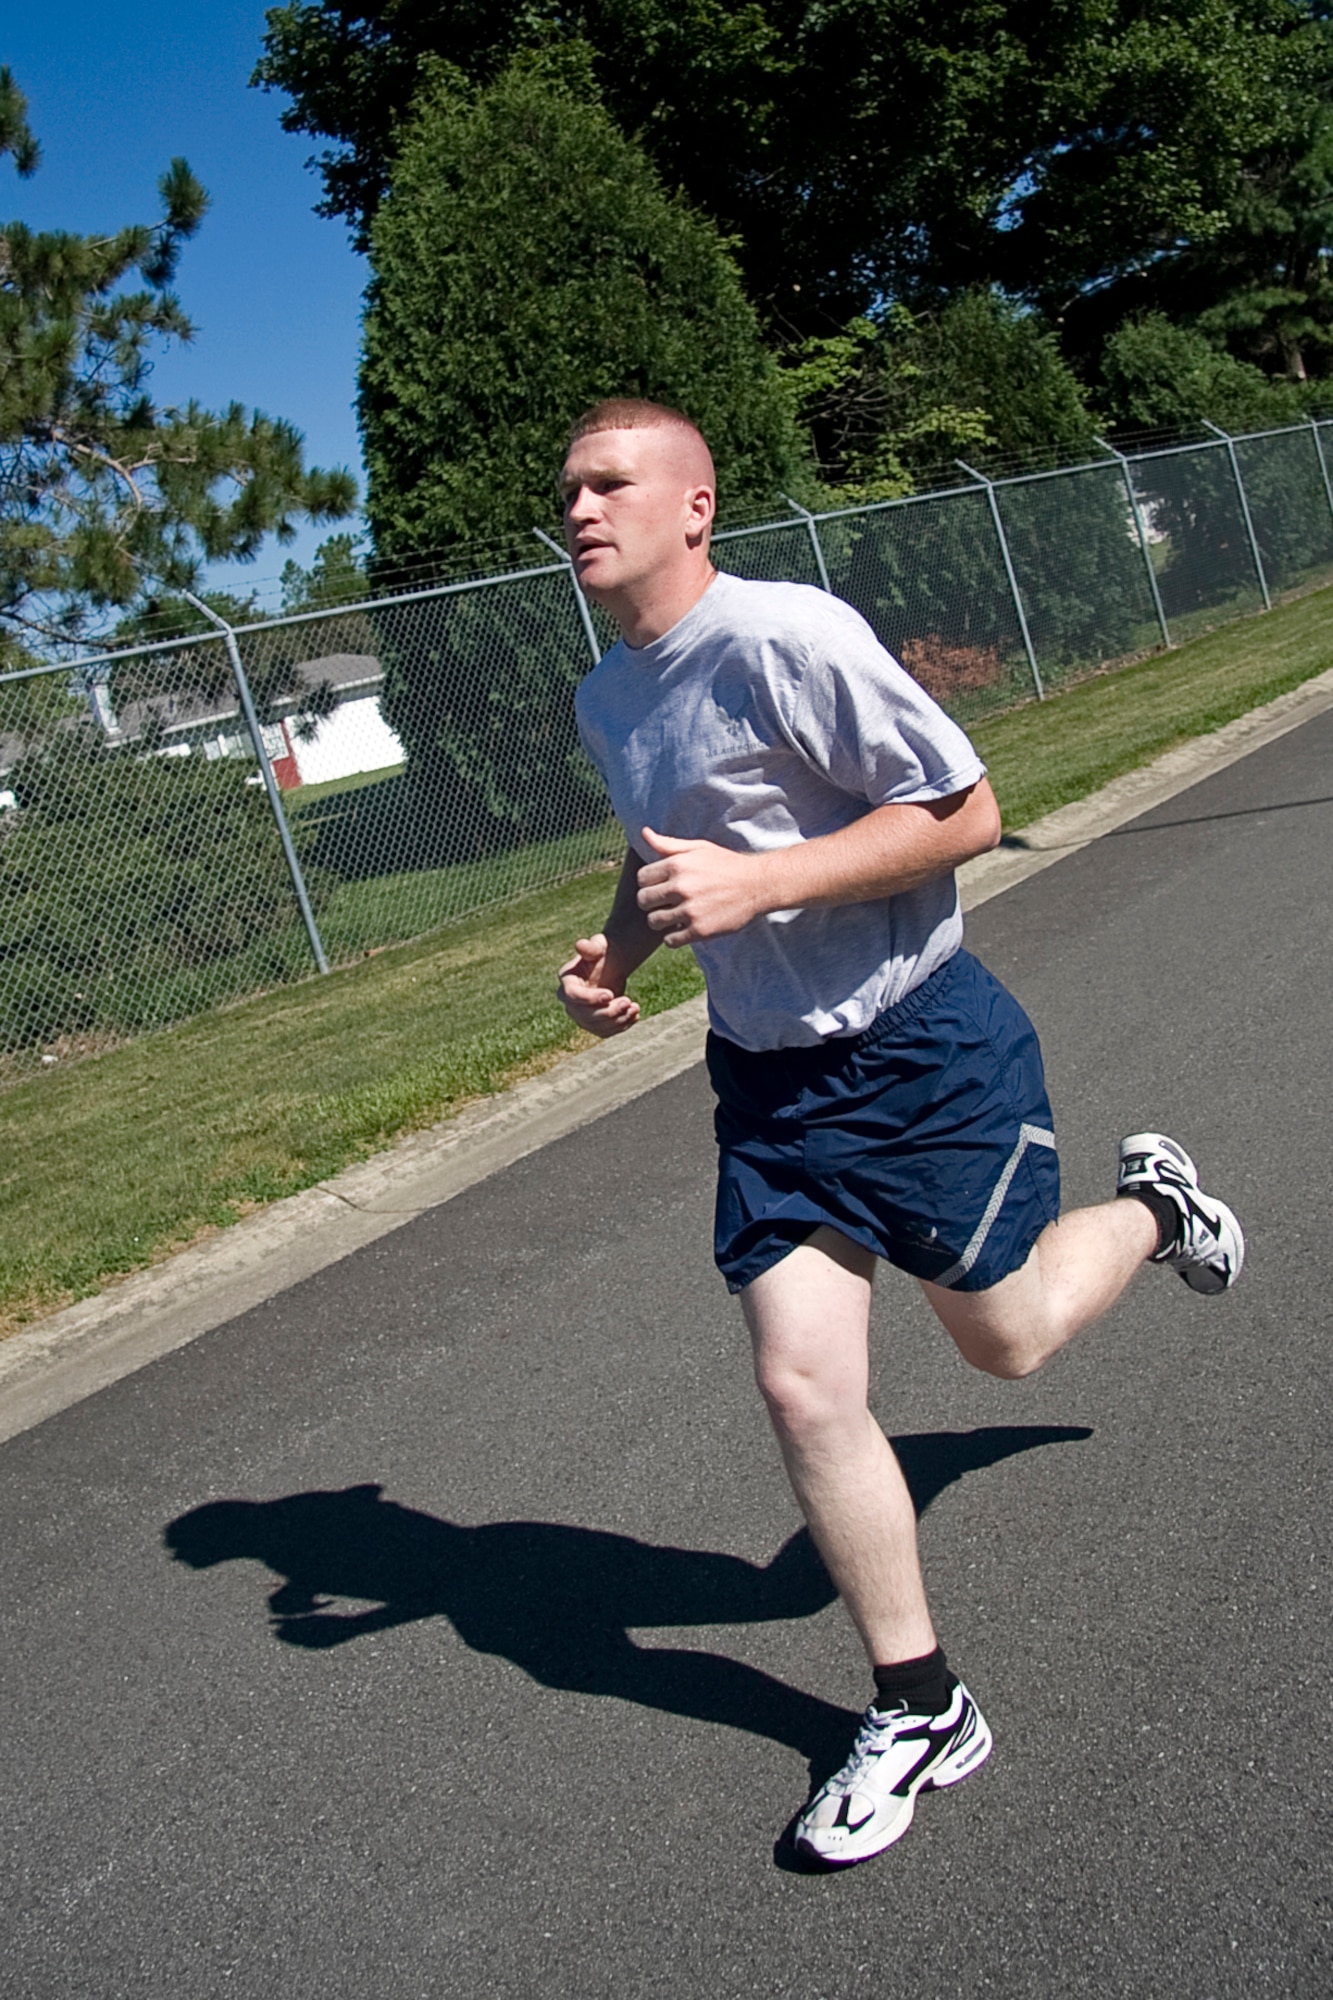 GRISSOM AIR RESERVE BASE, Ind. -- Staff Sgt. Joshua Carter races by during a fit-to-fight fitness test here recently. Starting in July, the Air Force implemented new fitness assessment standards, which now include bi-annual testing, minimum requirements within testing components and establishing fitness assessment cells to proctor tests. Airmen must meet minimum requirements as defined by the new instruction for each of the four components. Components are weighted as follows: 60 points for aerobic, 20 points for body composition, 10 points for pushups, and 10 points for sit-ups, for a total of 100 possible points. Sergeant Carter is a structural repair specialist with the 434th Maintenance Squadron. (U.S. Air Force photo/Tech. Sgt. Mark R. W. Orders-Woempner)